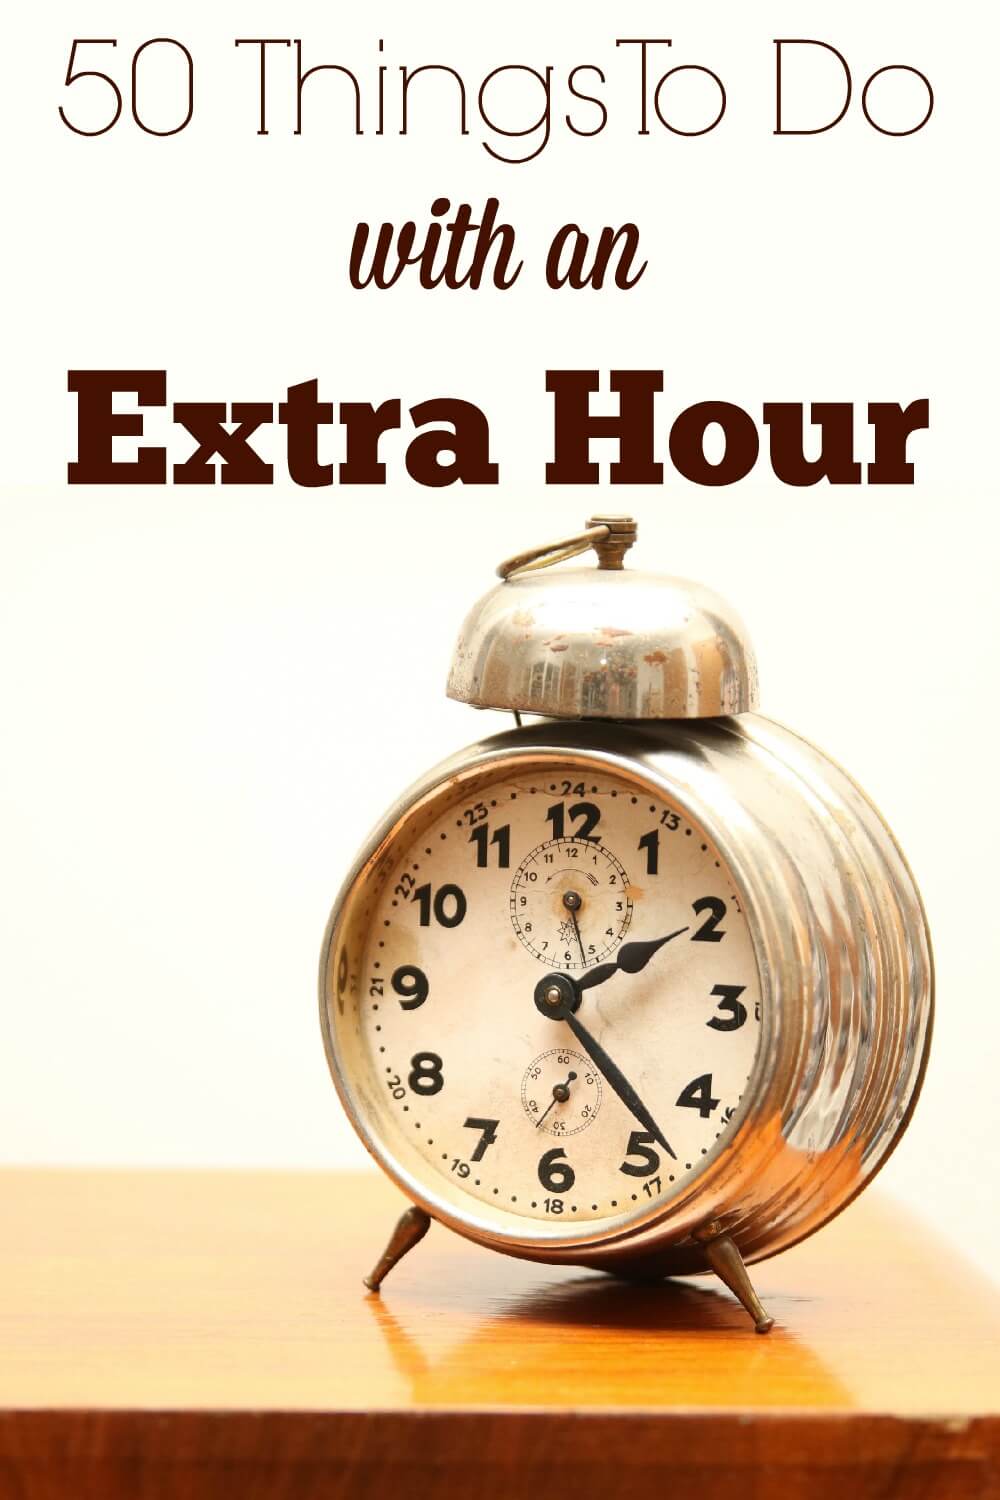 Daylight Savings Time is coming to a close - what will you do with your extra hour?